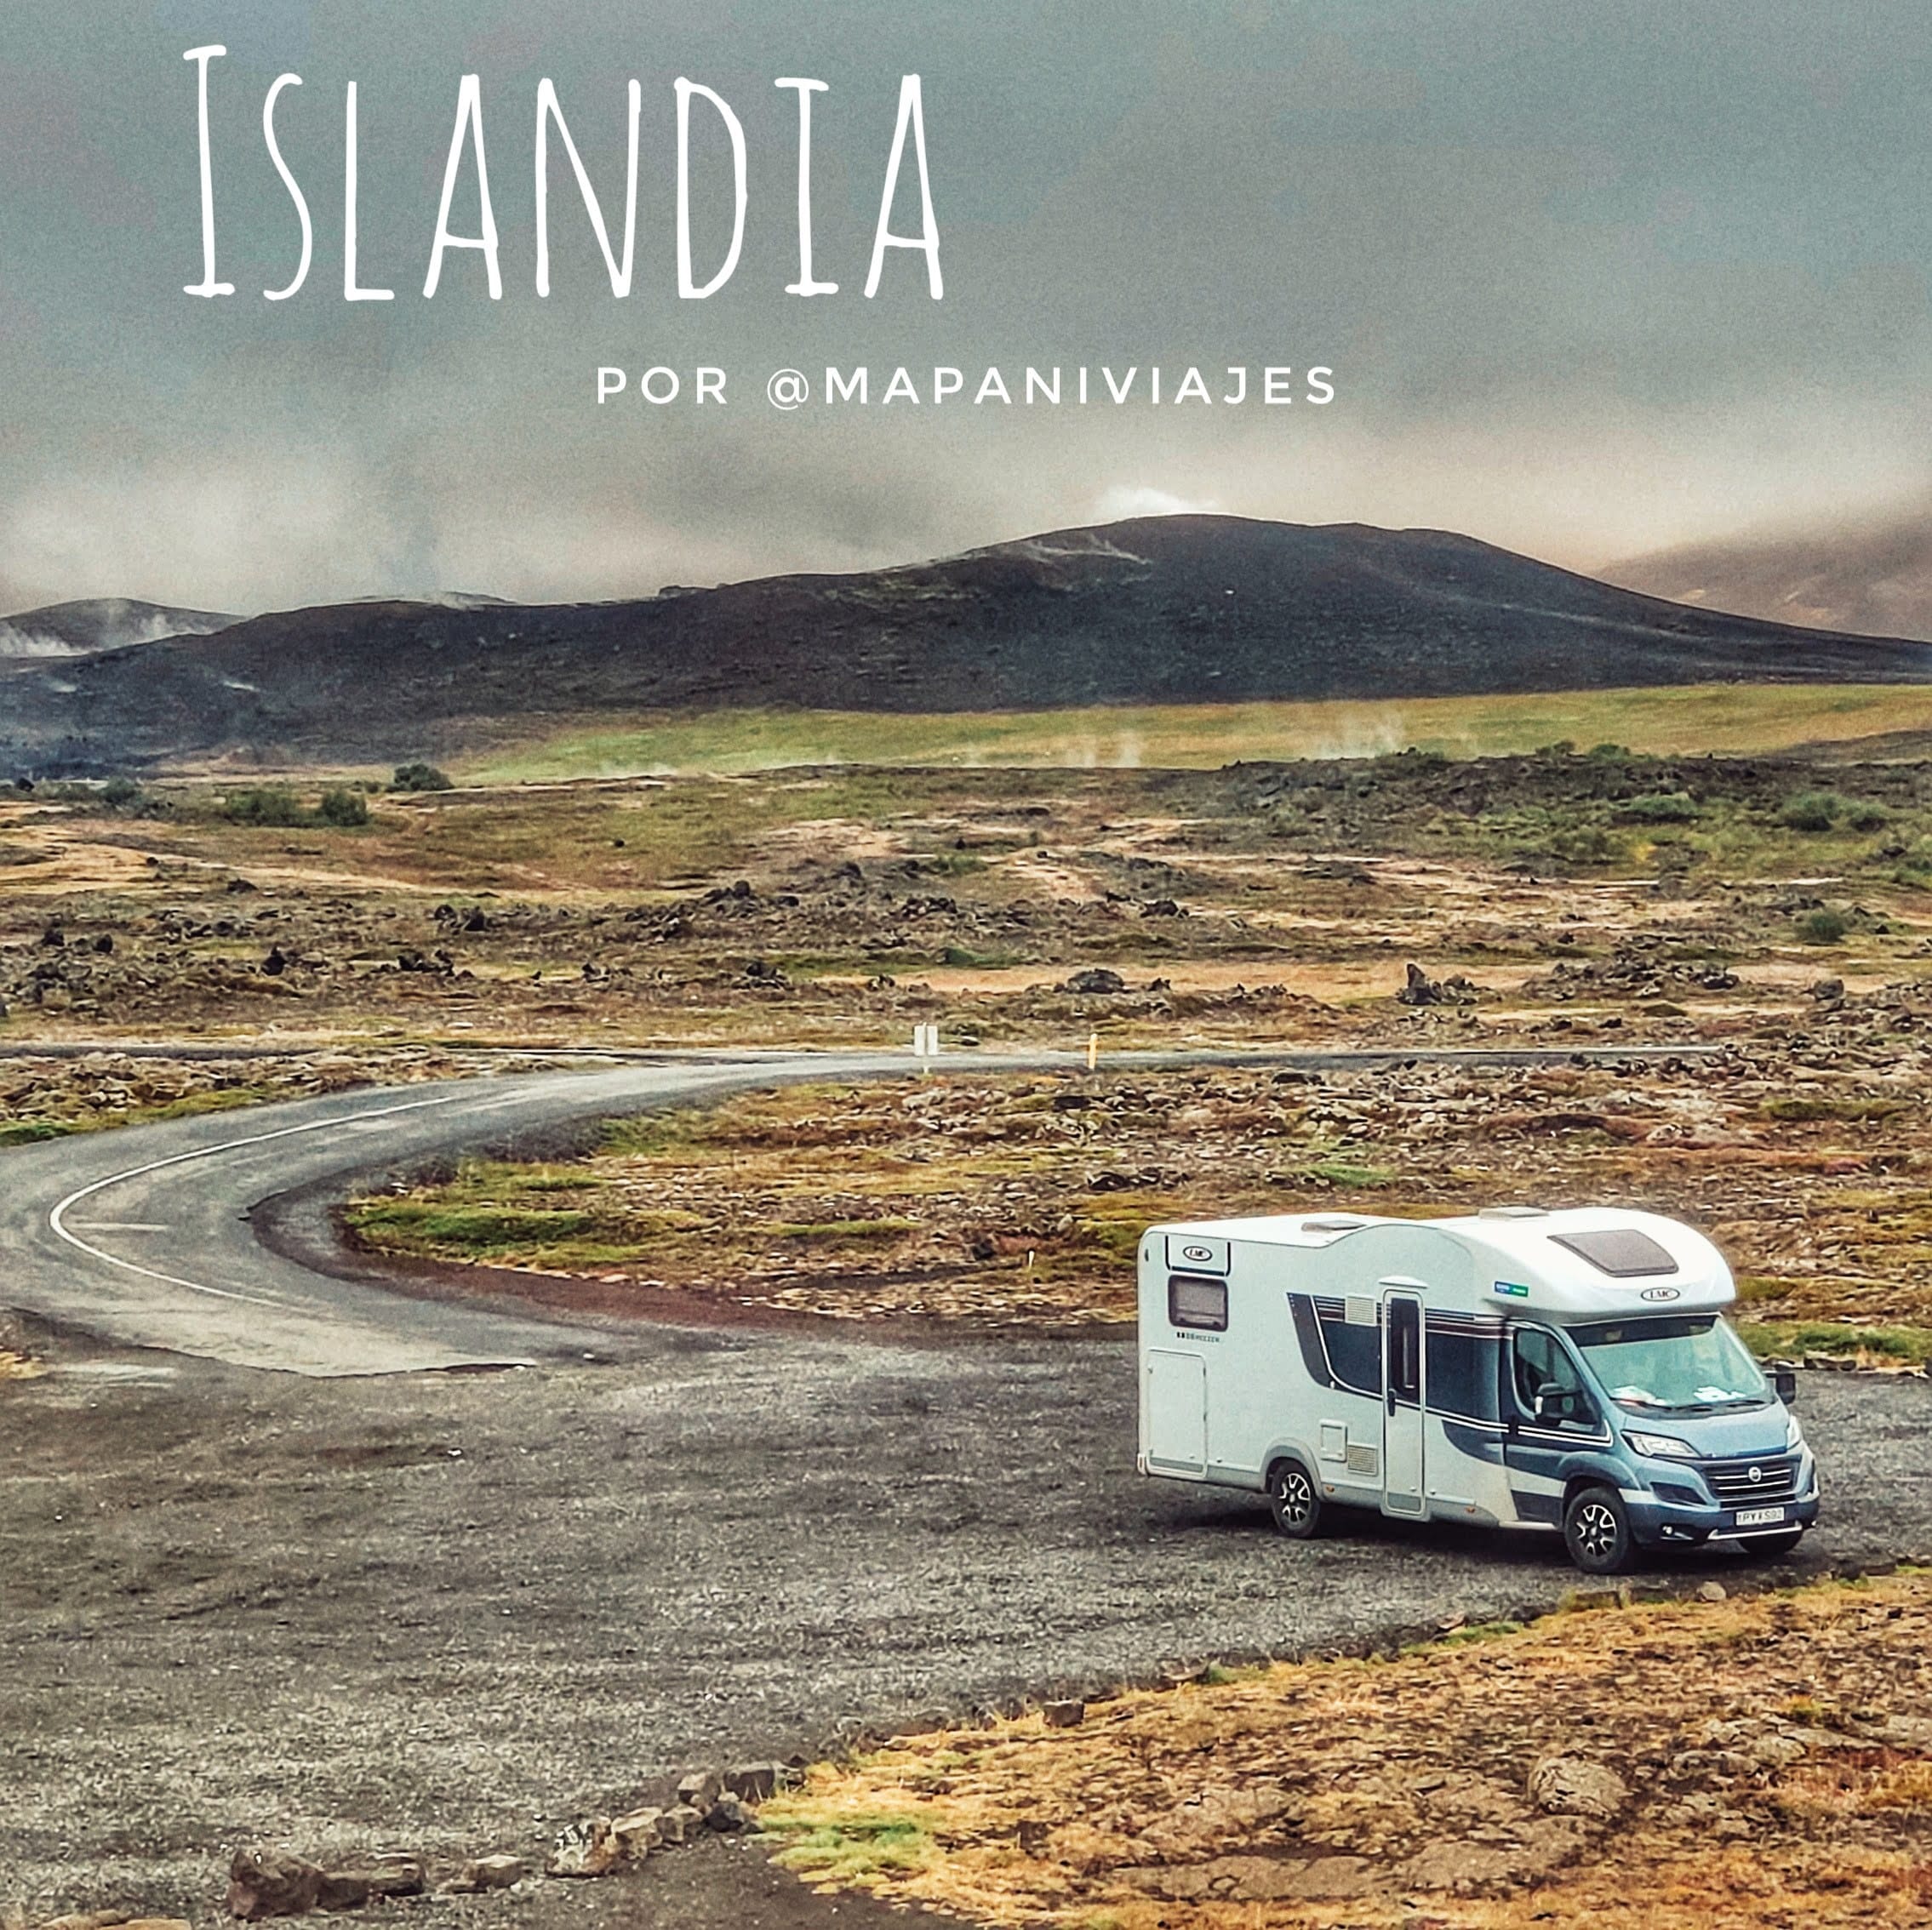 Read more about the article Iceland in a motorhome by @mapaniviajes